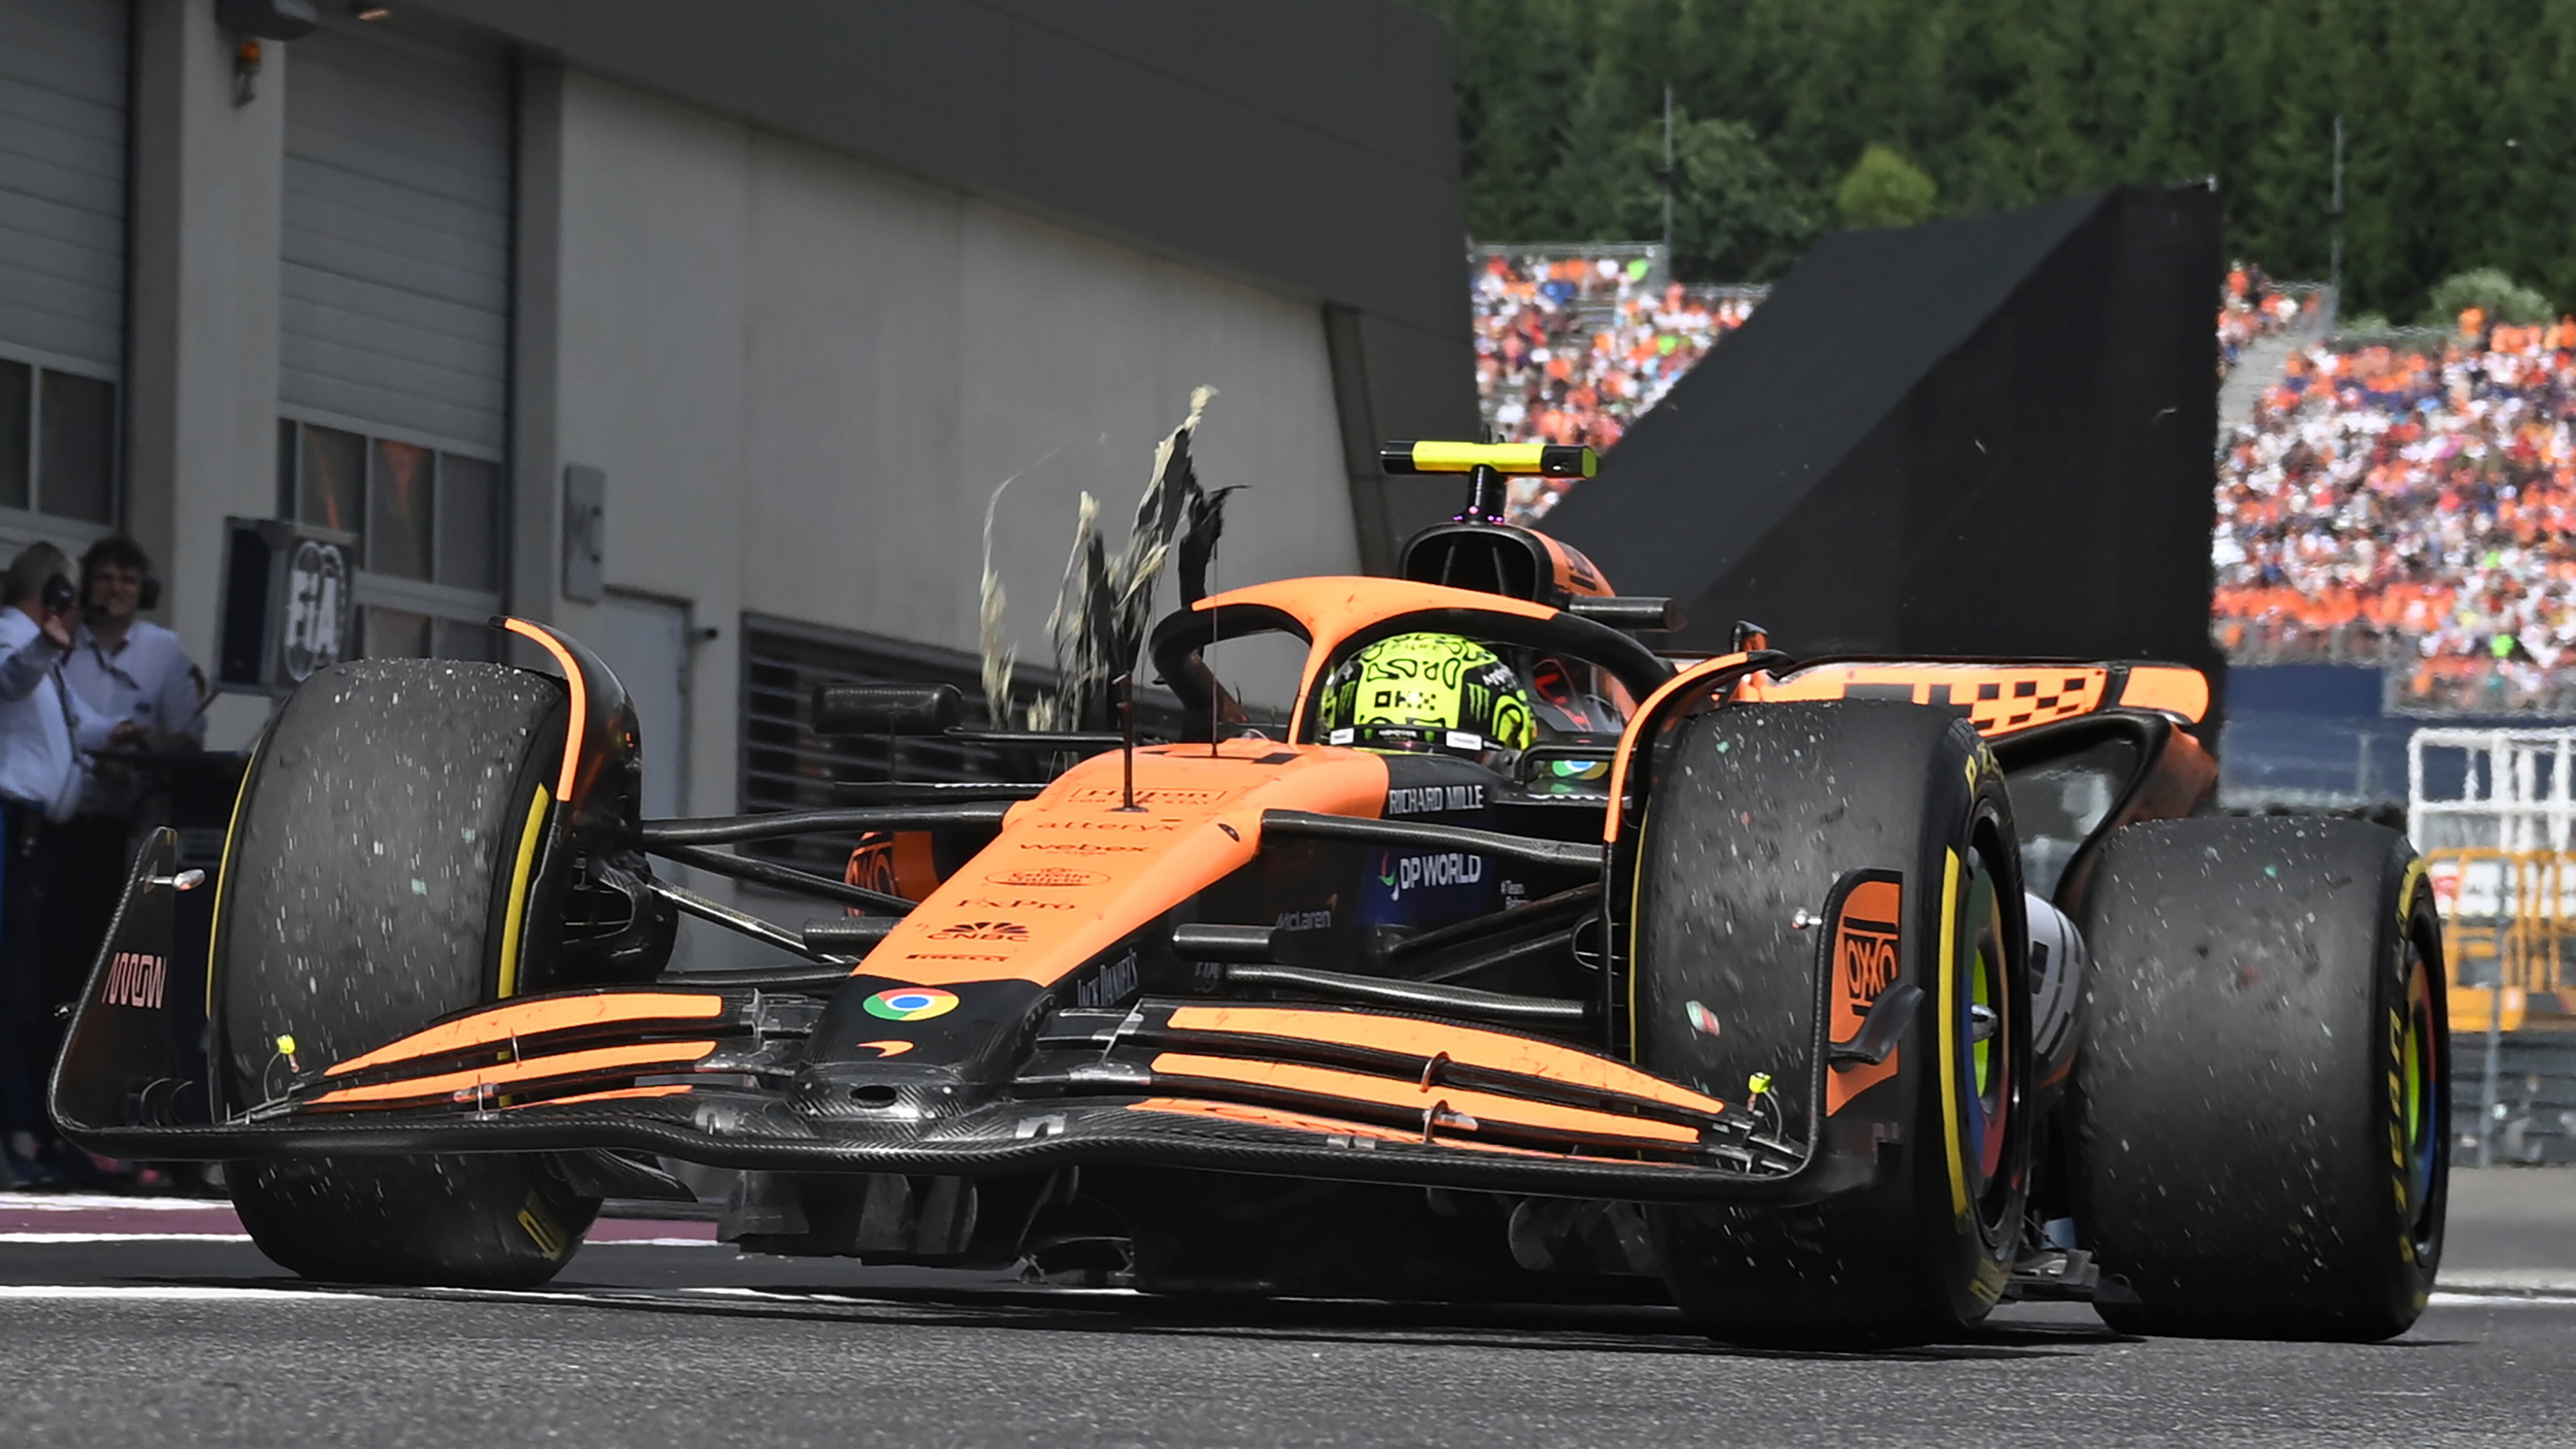 Lando Norris demanded an apology after his collision with Max Verstappen (Christian Bruna/AP)